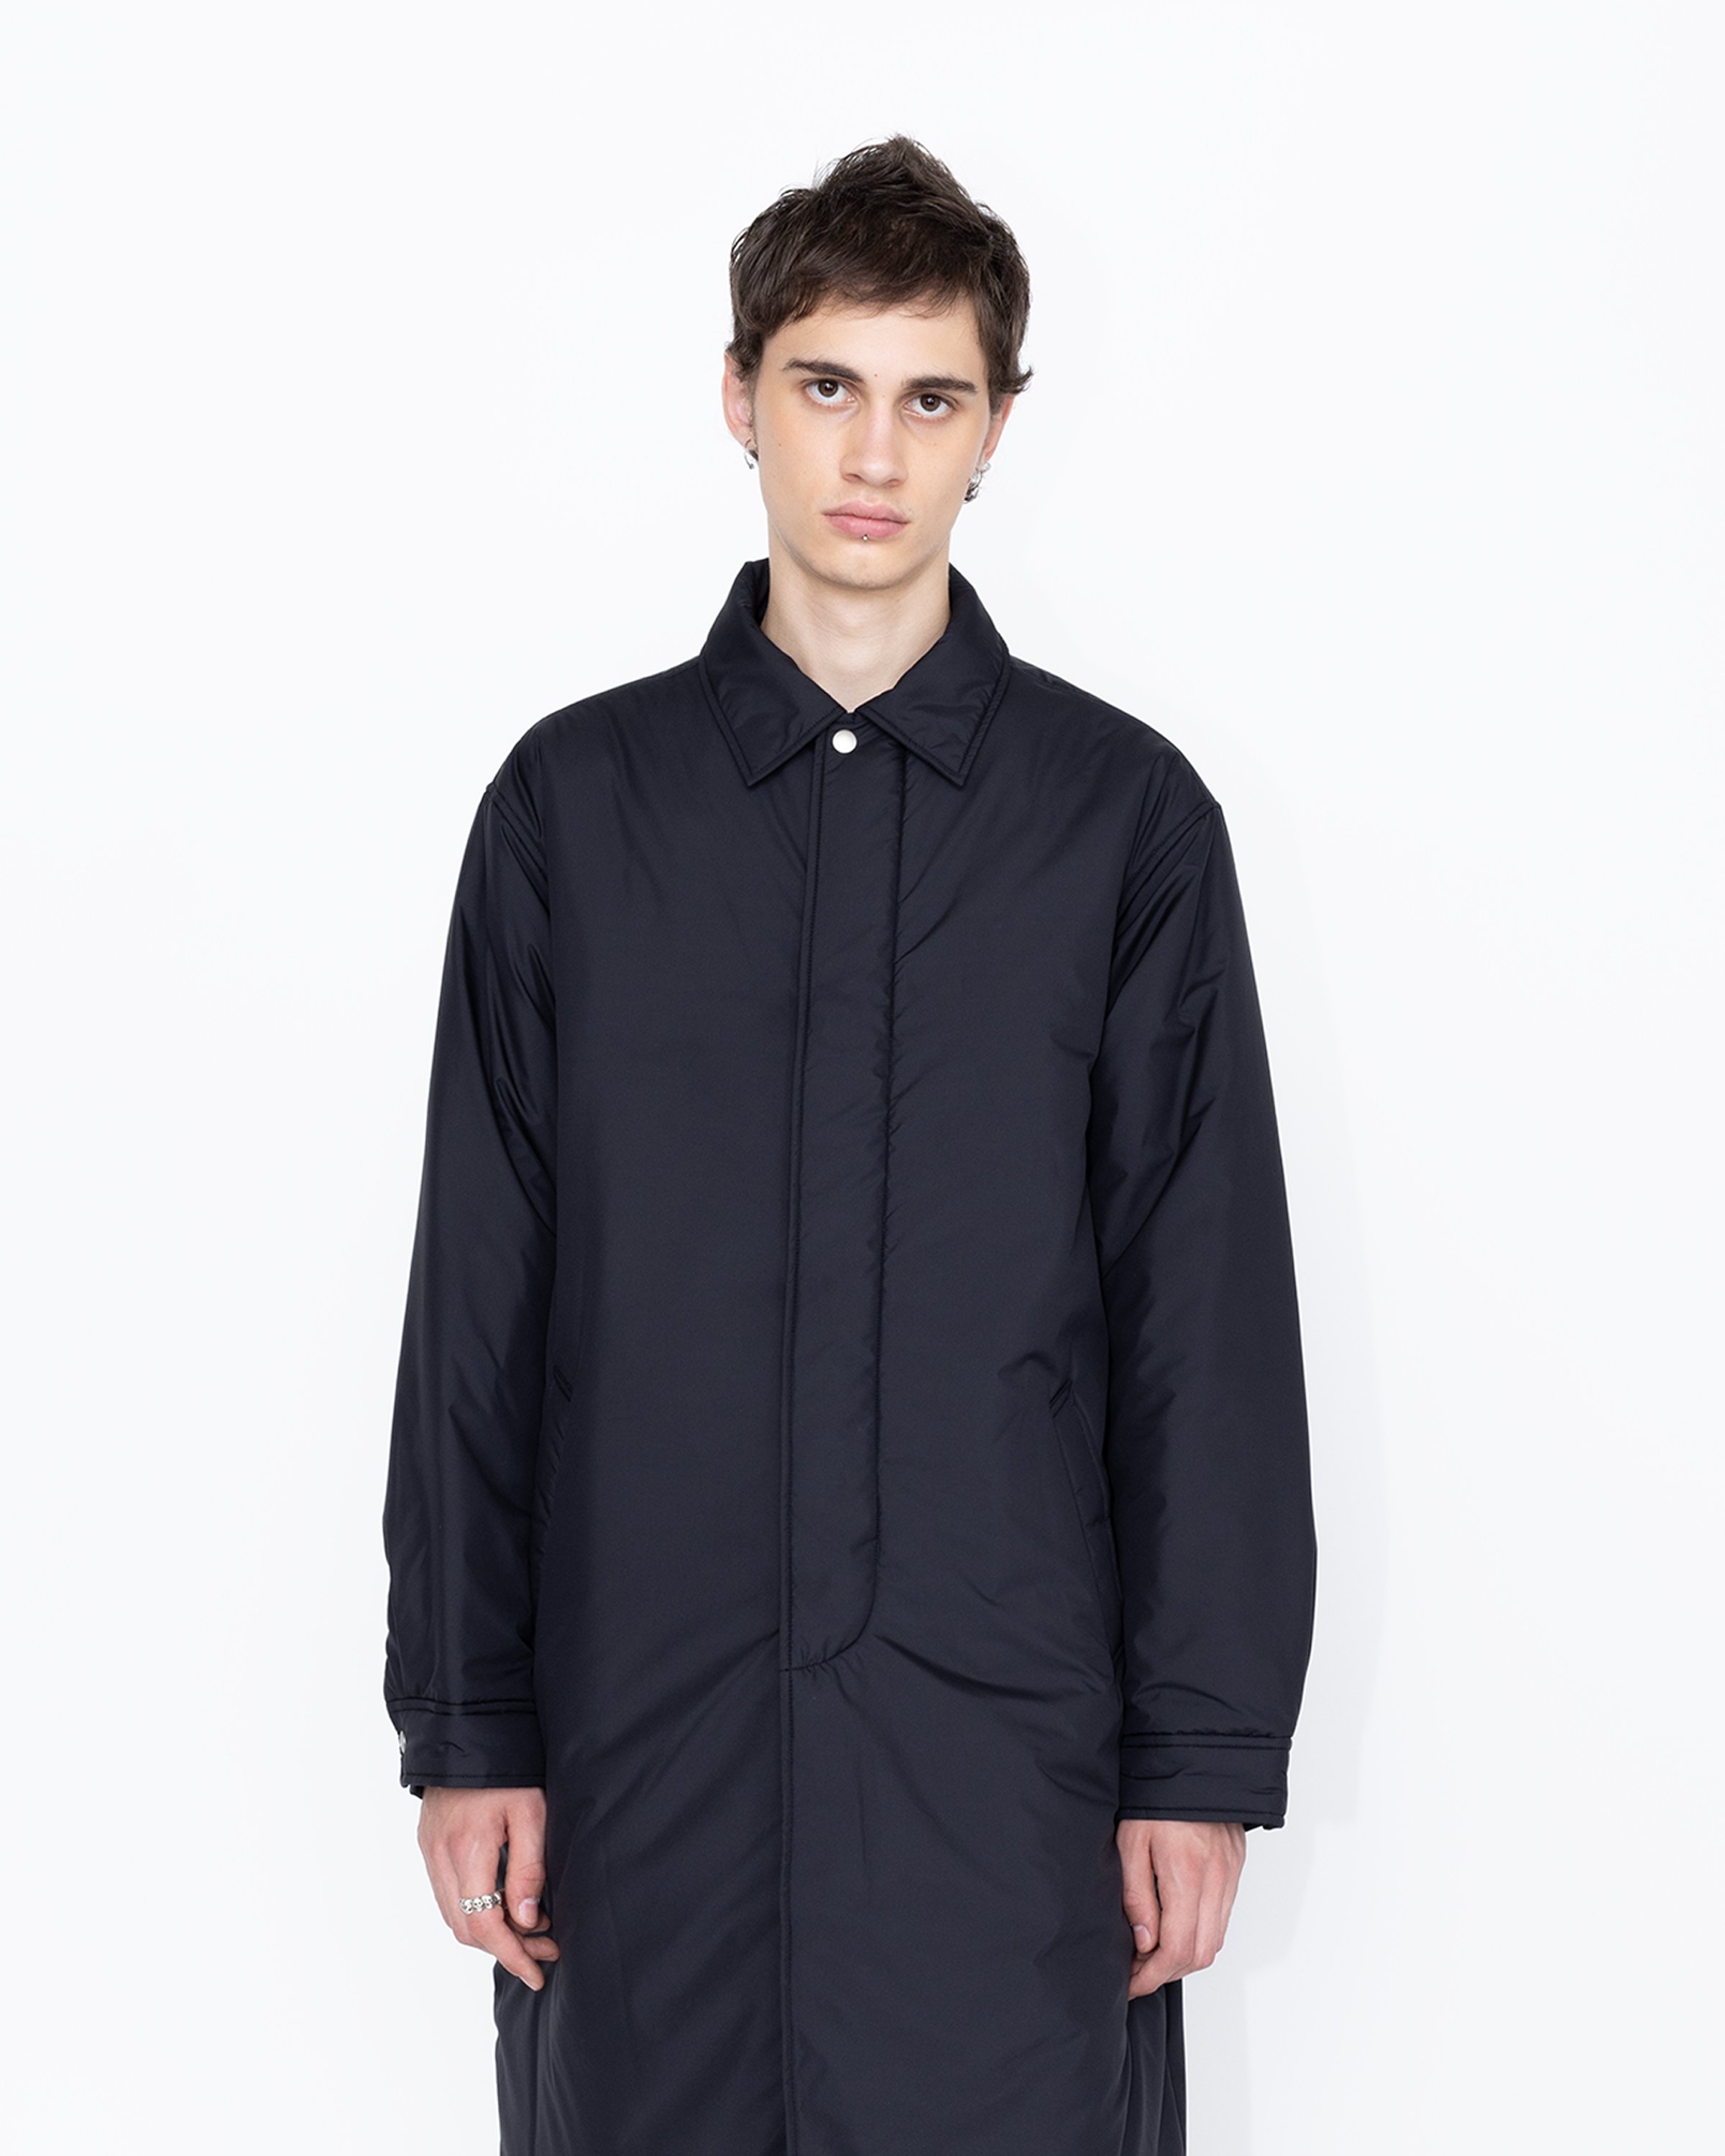 Highsnobiety HS05 – Light Insulated Eco-Poly Trench Coat Black - Outerwear - Black - Image 3